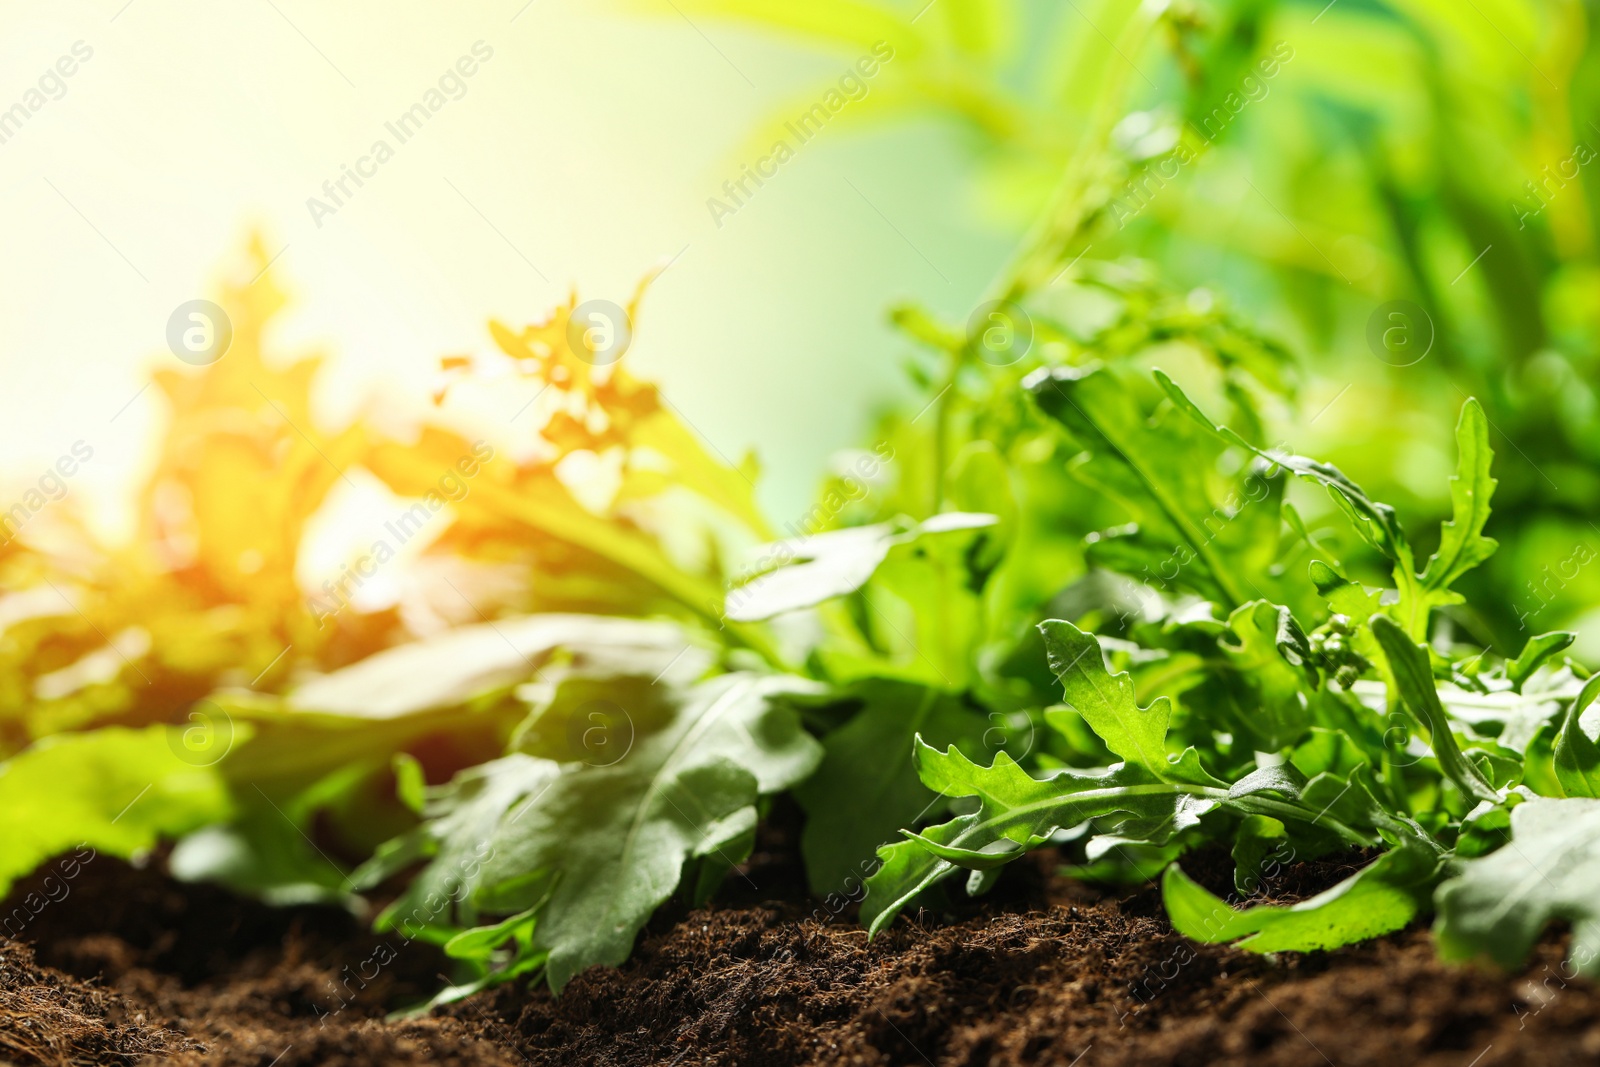 Image of Sunlit young sprouts of arugula plant in soil, closeup